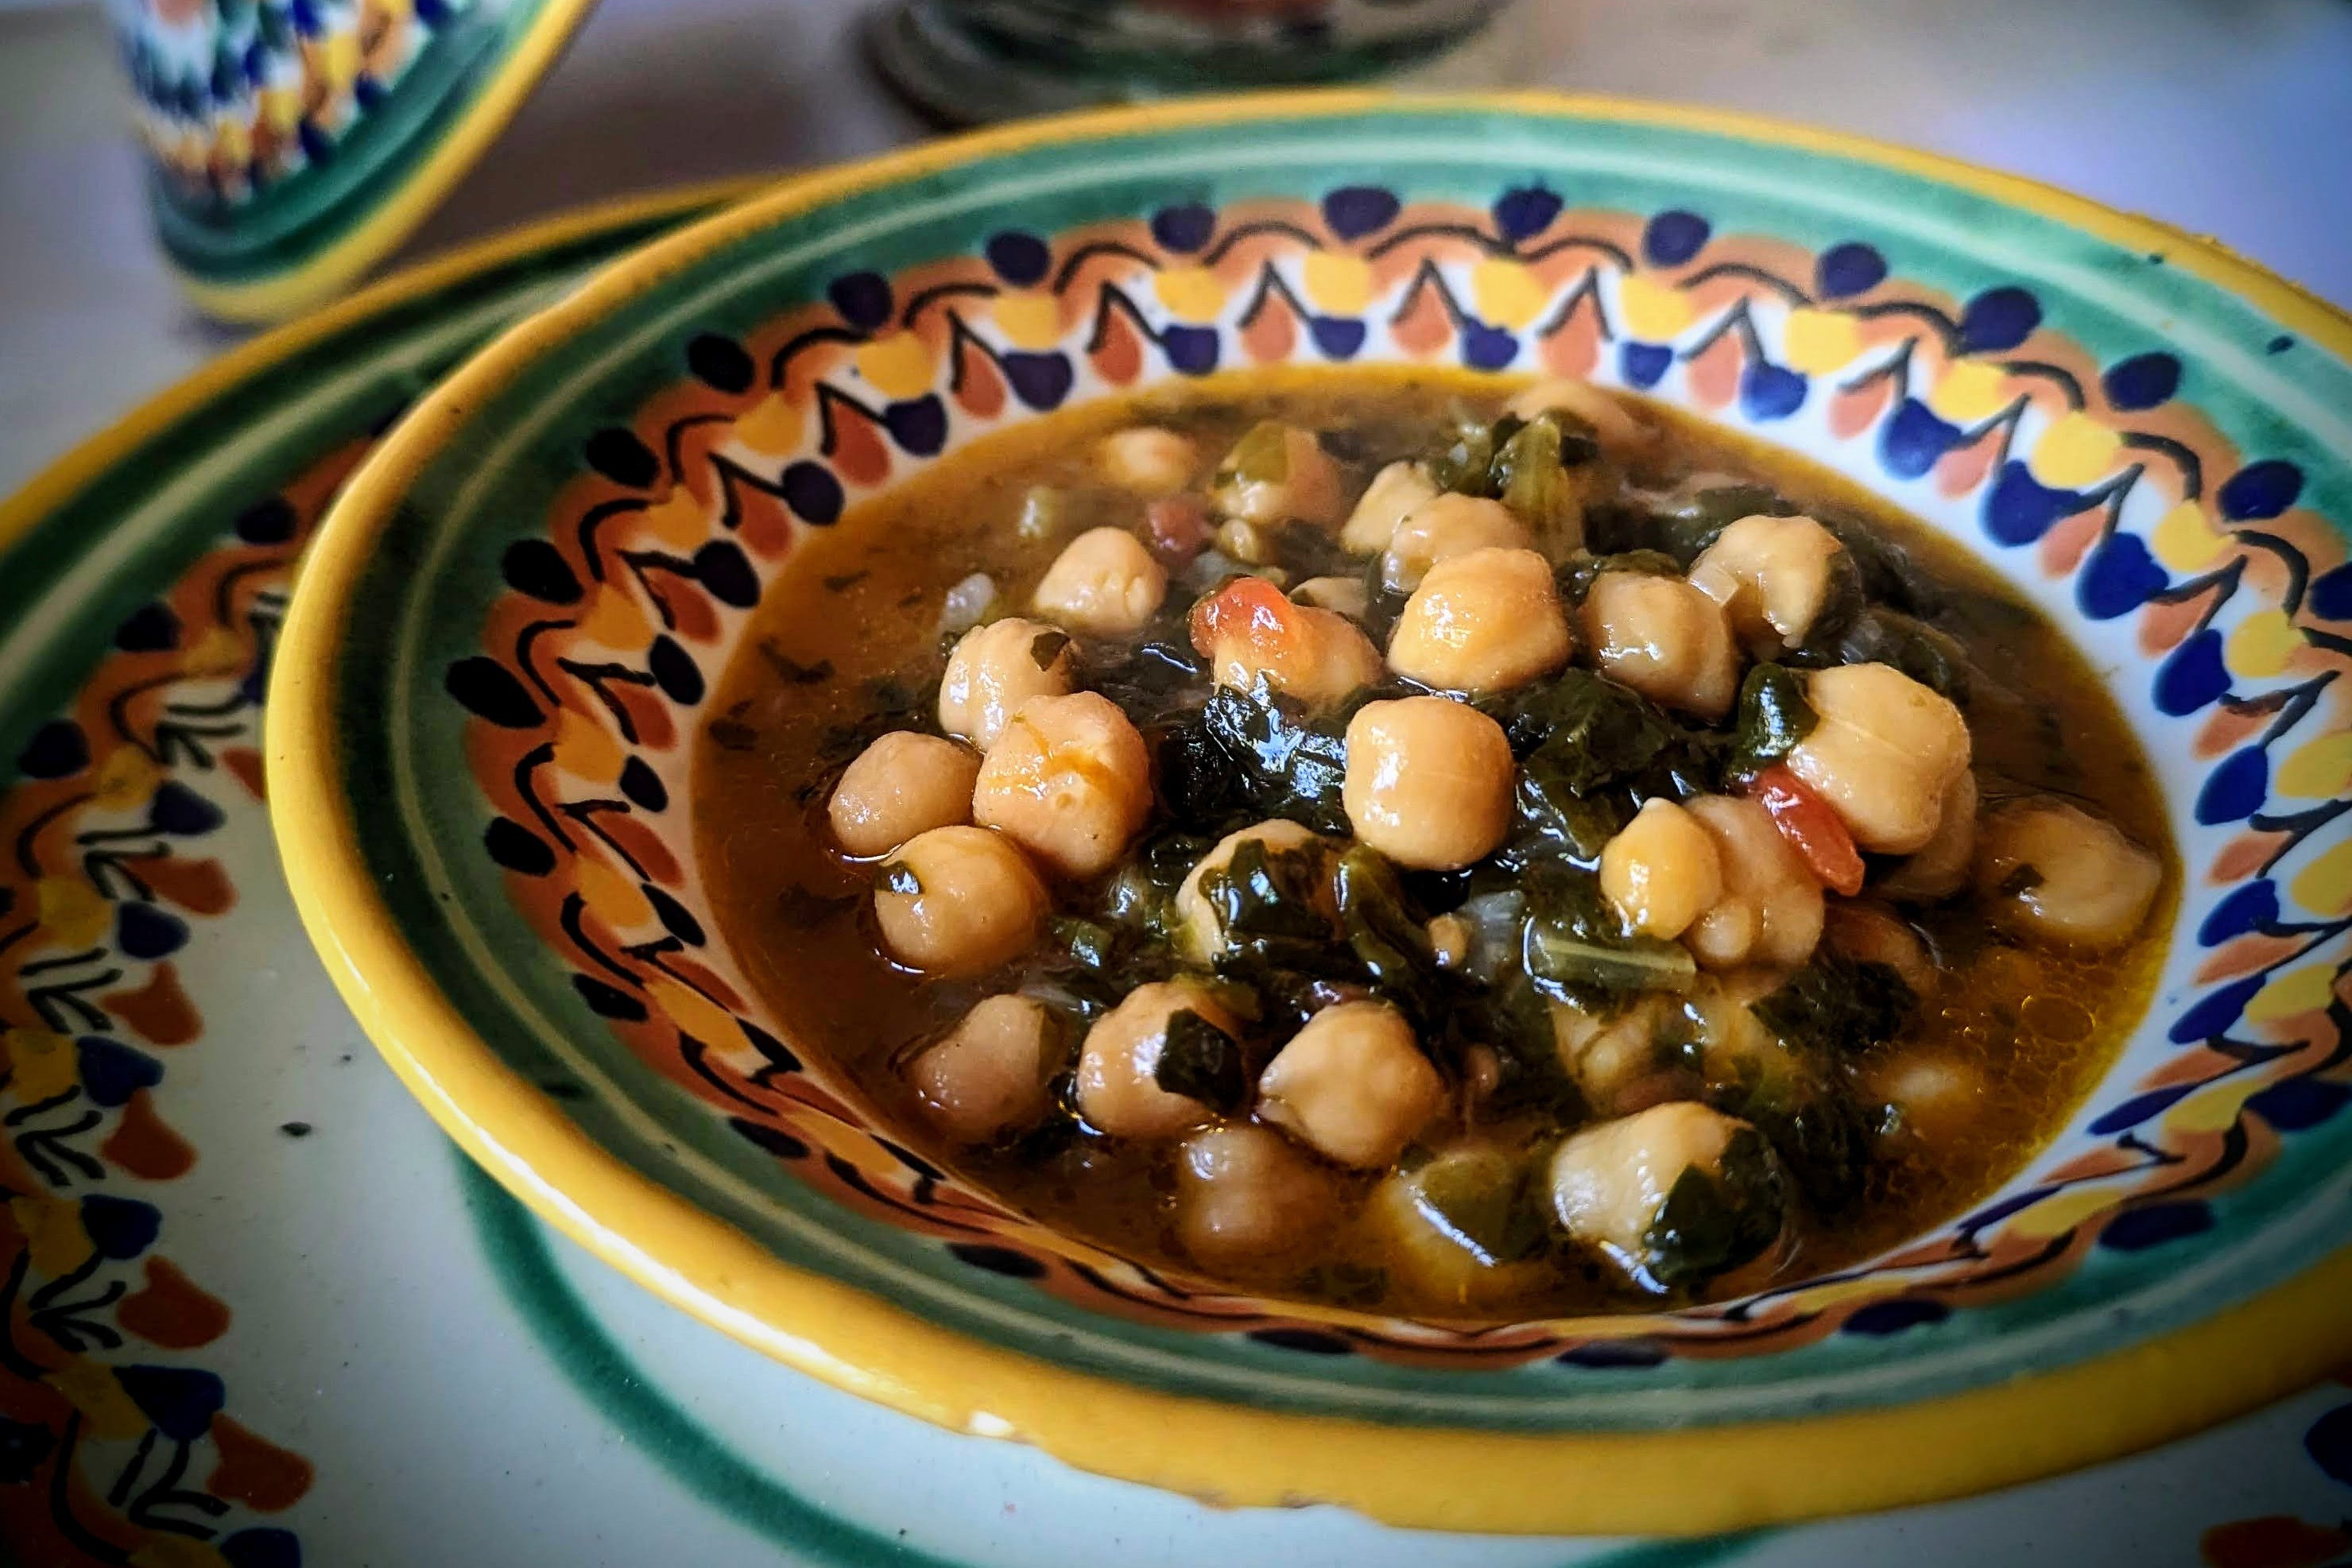 Garbanzo and spinach stew in a colorful bowl